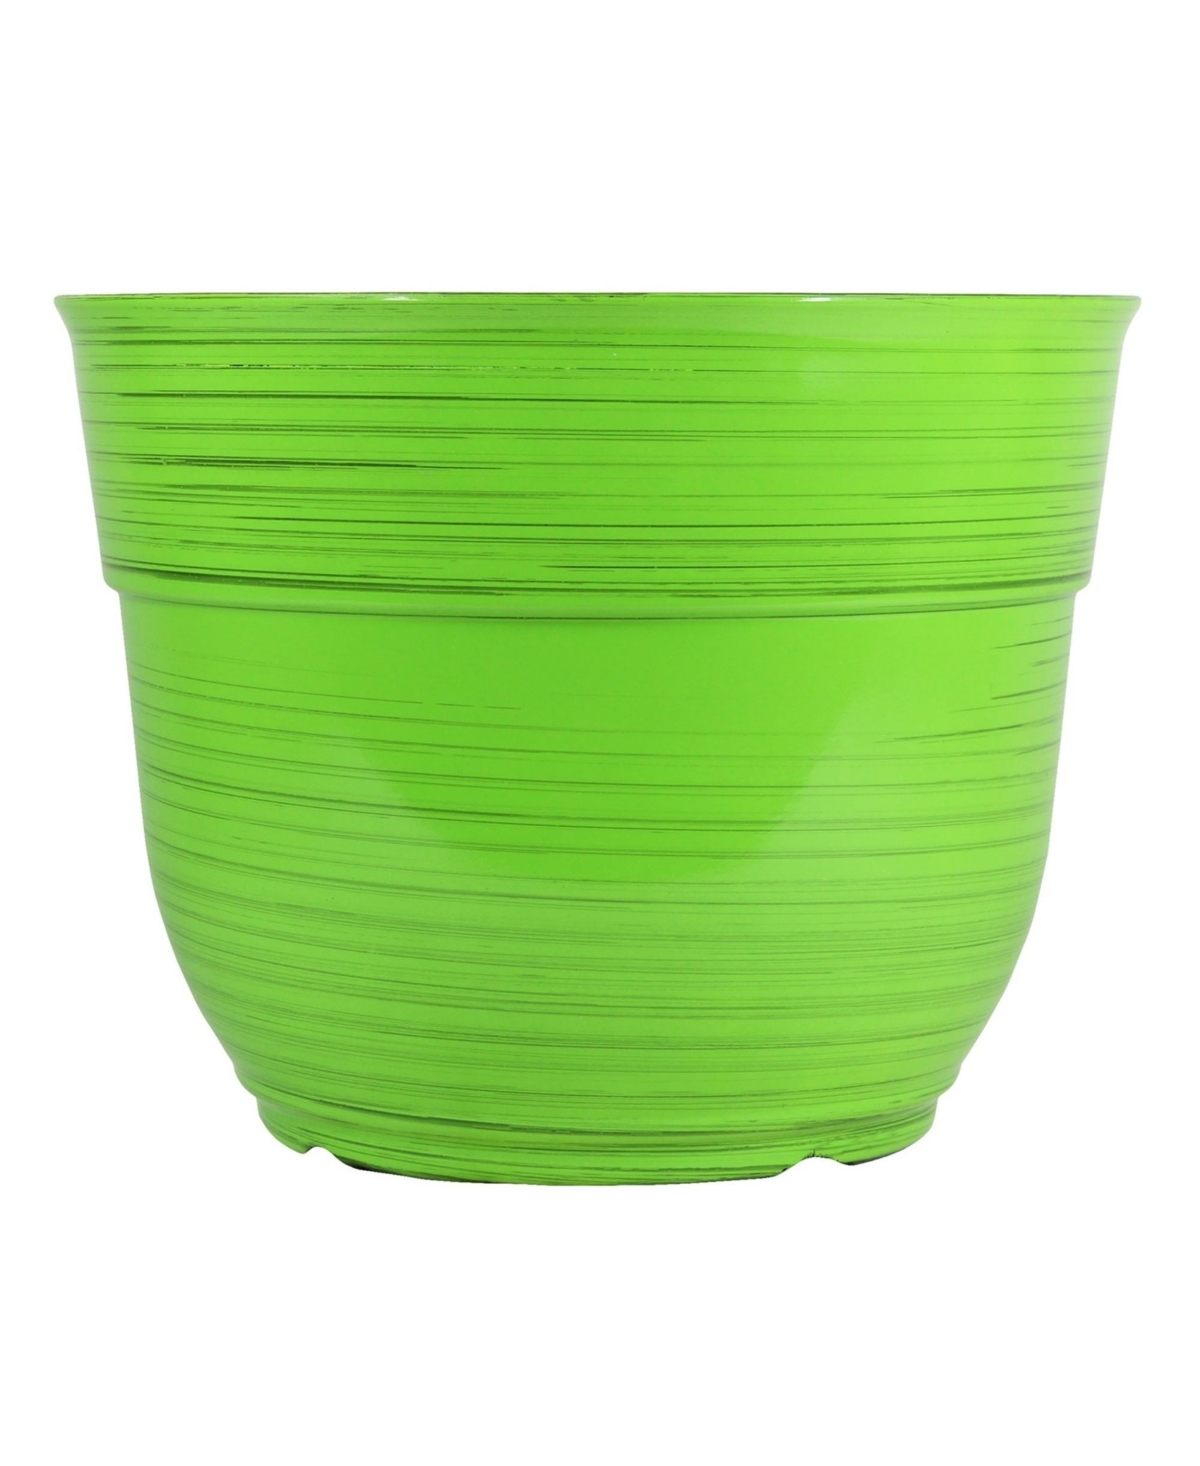 Glazed Brushed Happy Large Plastic Planter Bright Green 15 Inches - Green